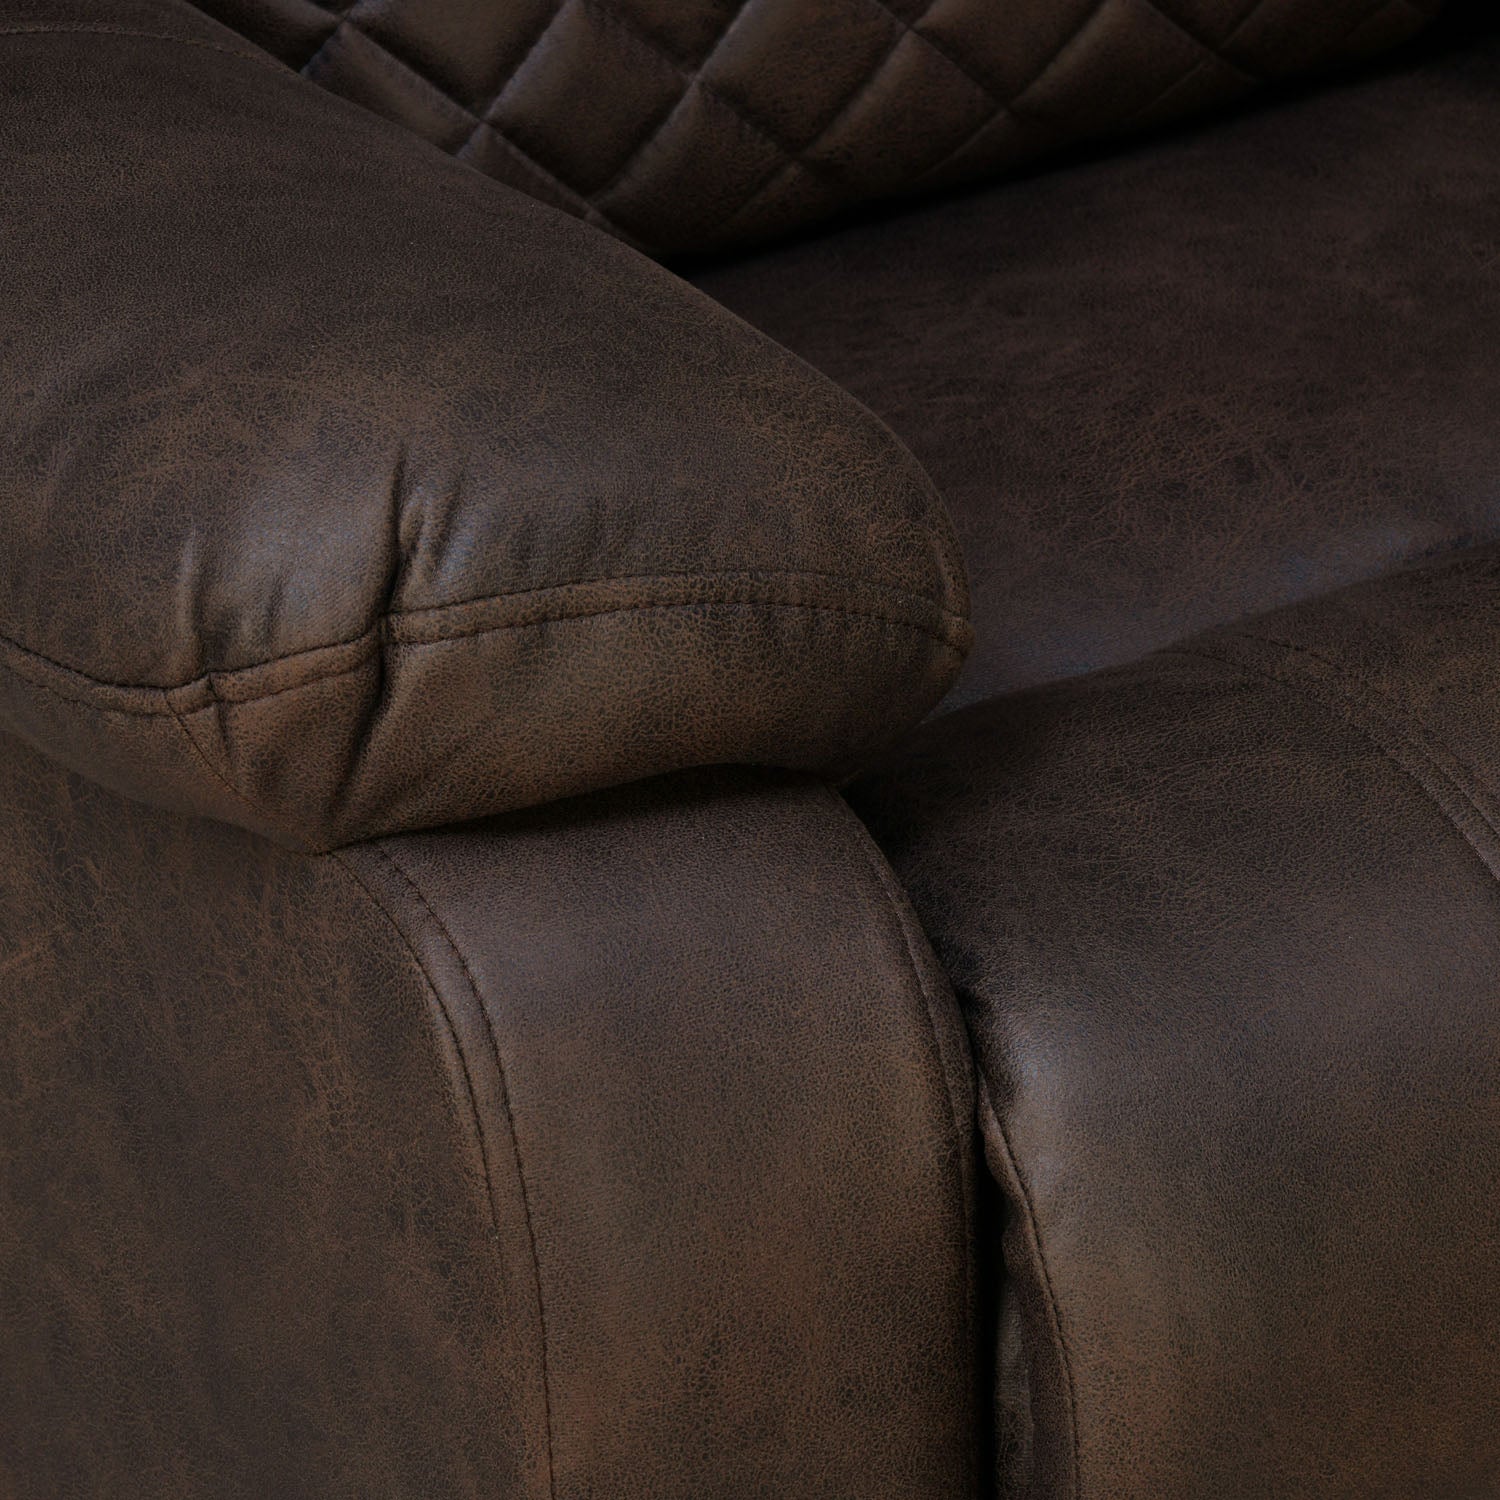 Dallas 3 Seater Fabric Electric Recliner (Brown)